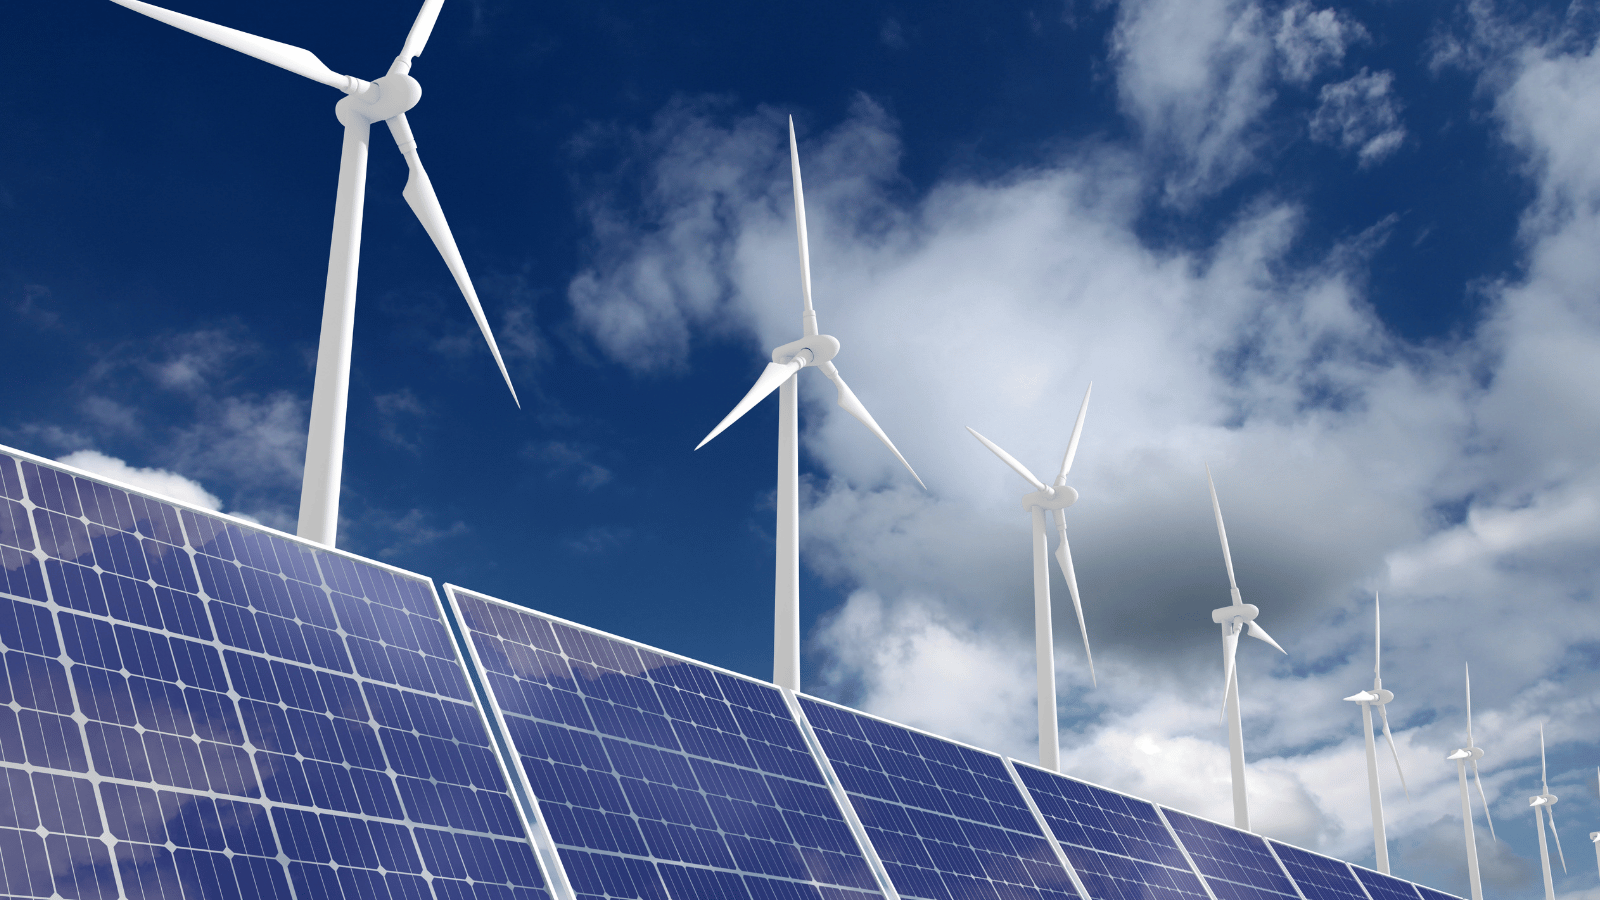 Sheet Metal in Renewable Energy Sector: Solar and Wind Applications